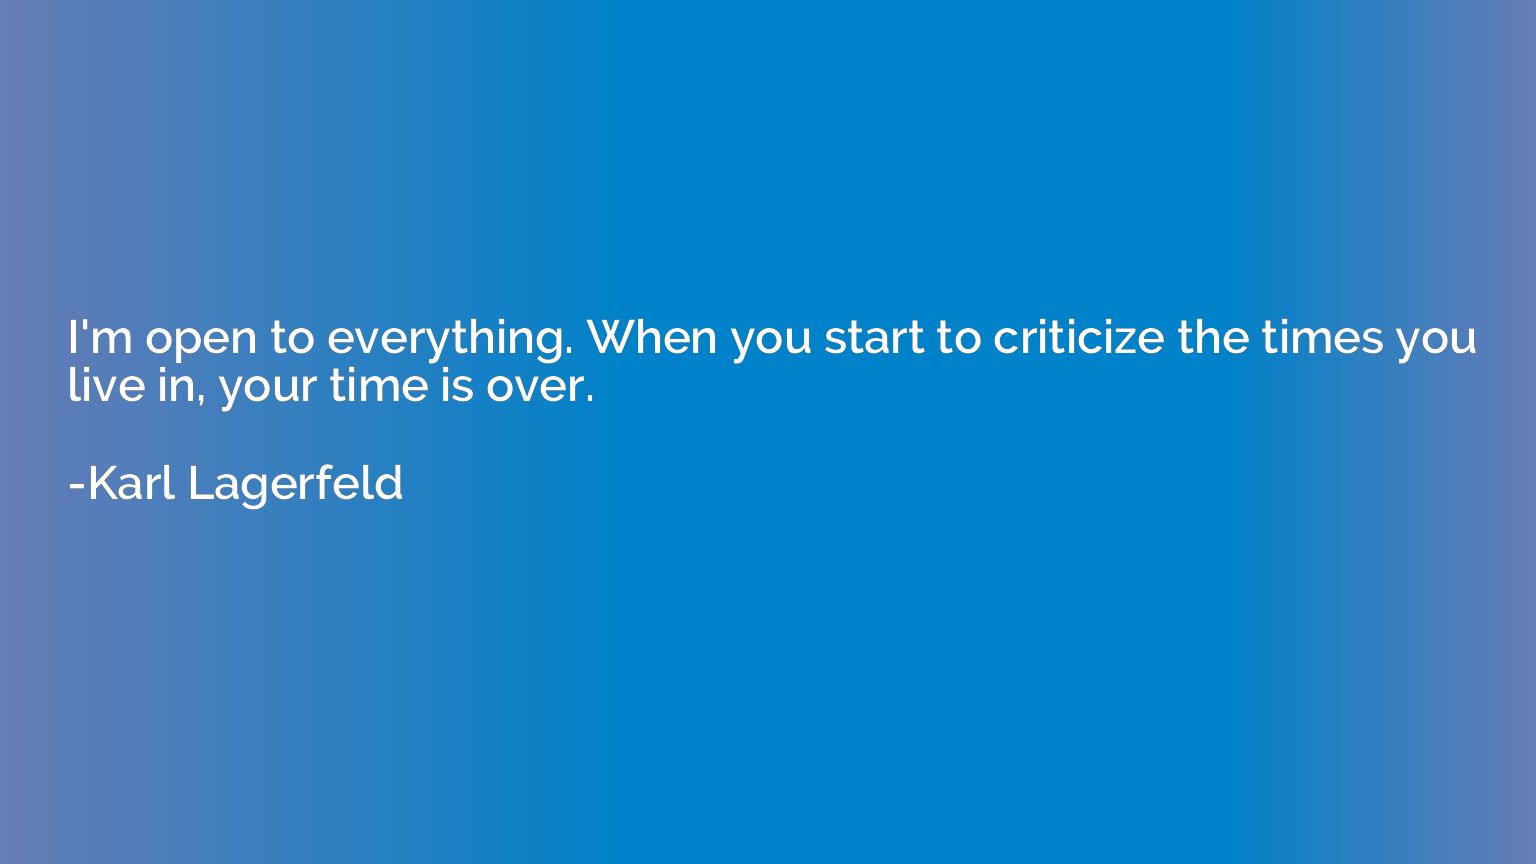 I'm open to everything. When you start to criticize the time